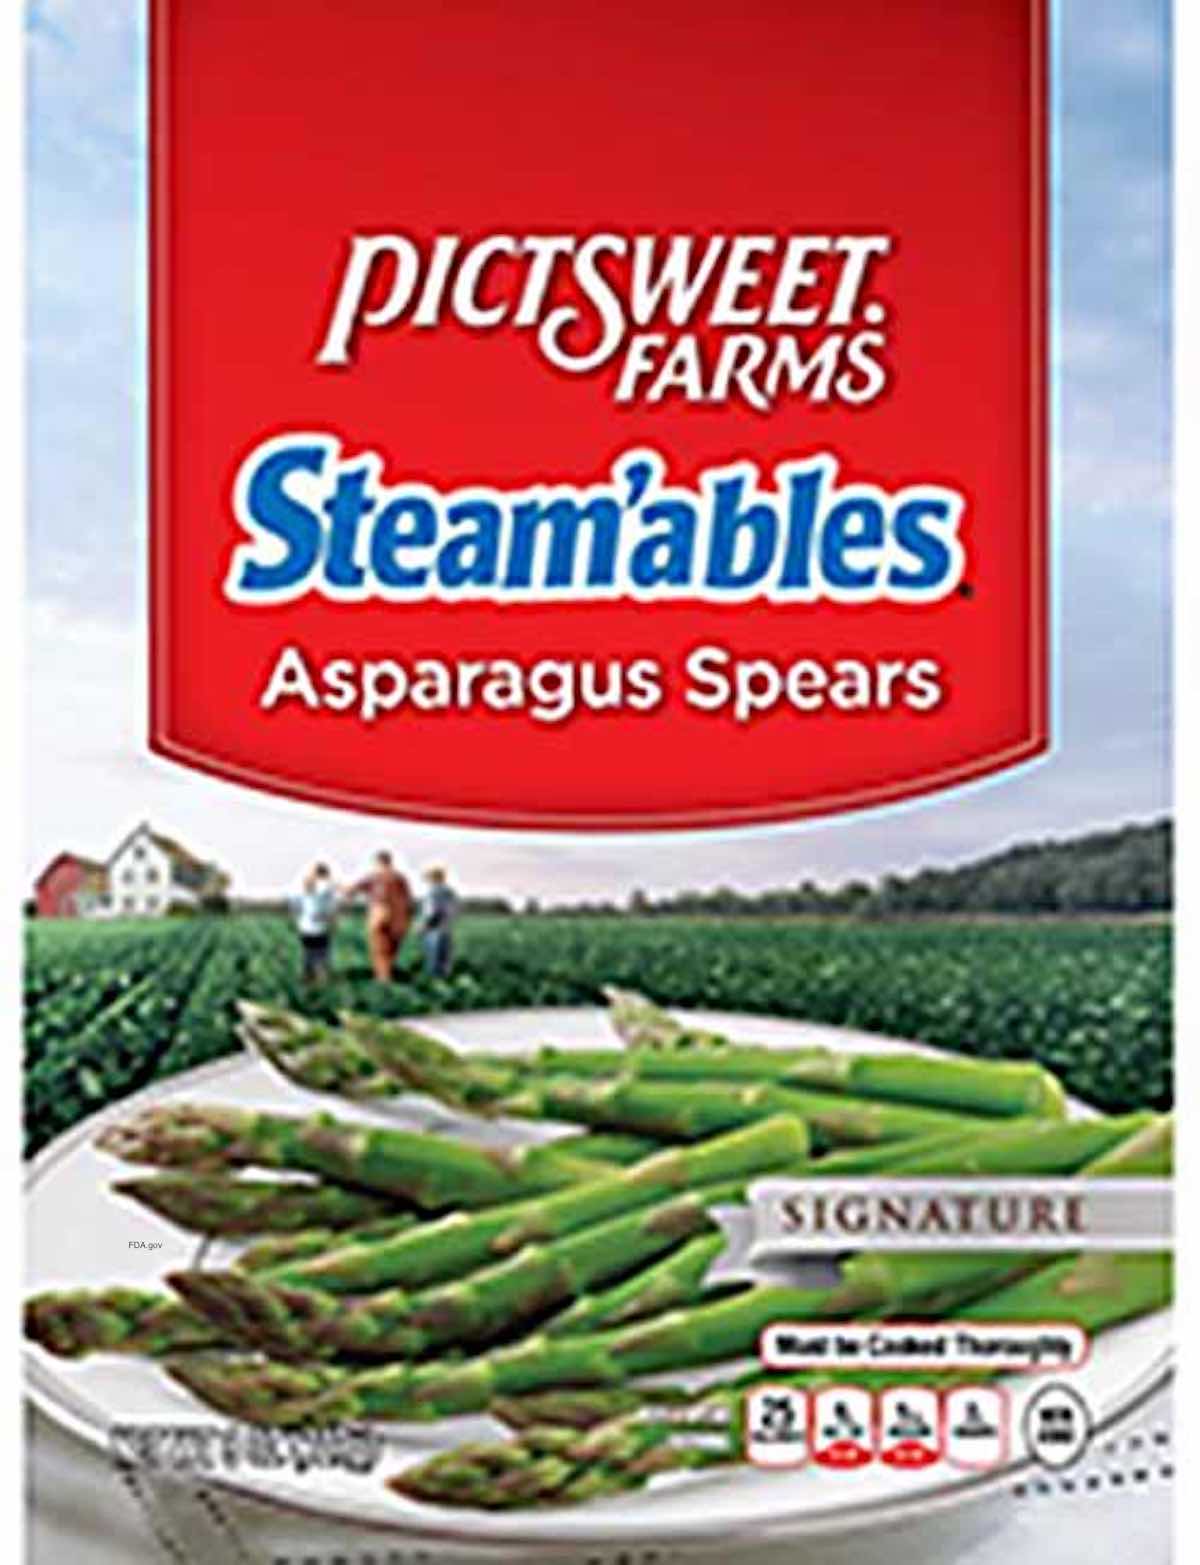 Pictsweet Steam'ables Asparagus Listeria Recall